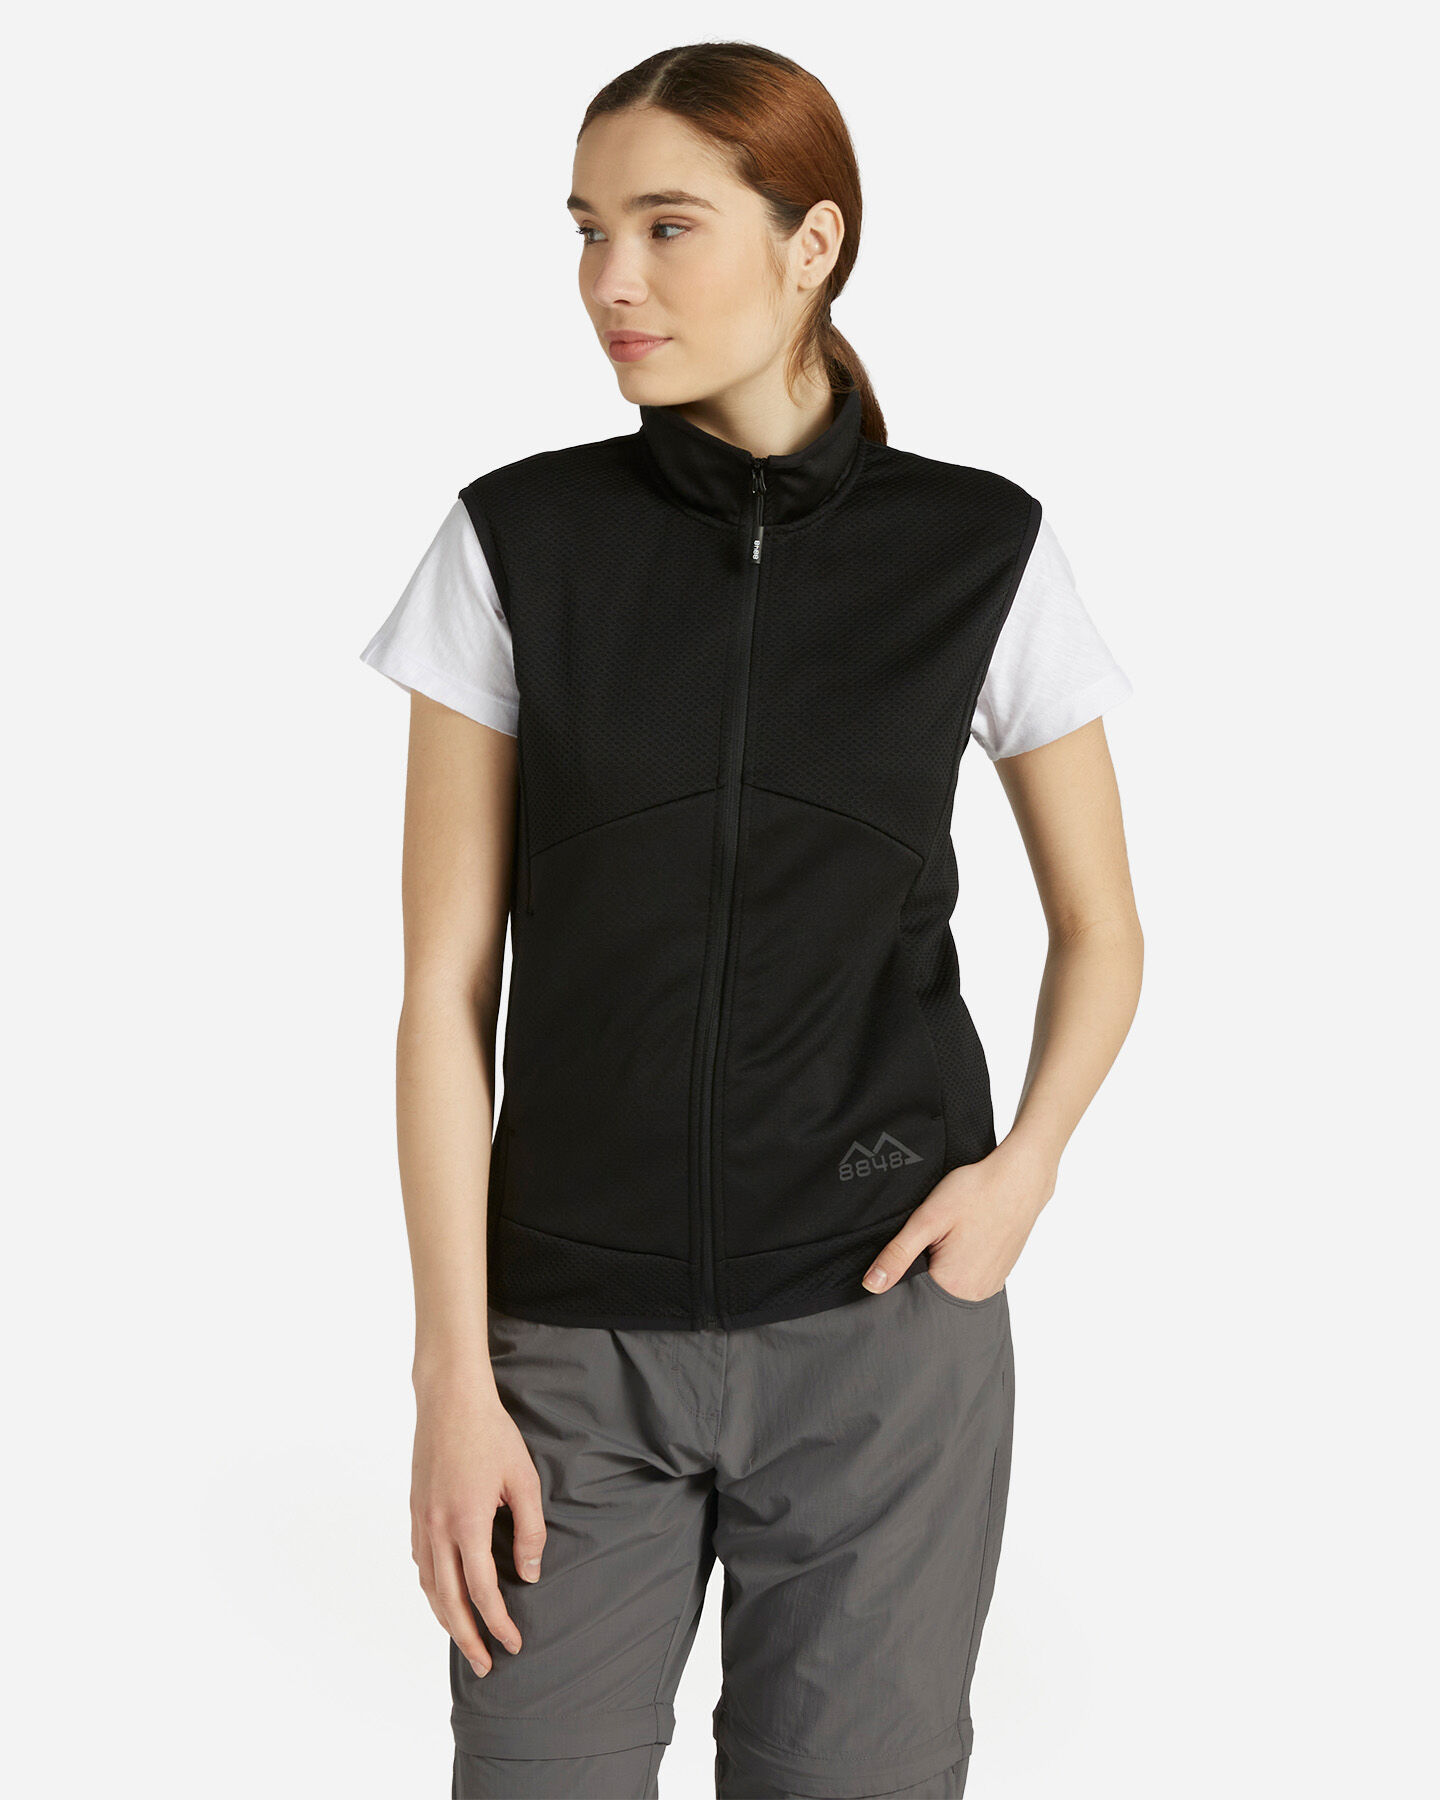  Gilet 8848 MOUNTAIN HIKE W S4120777|050|S scatto 0